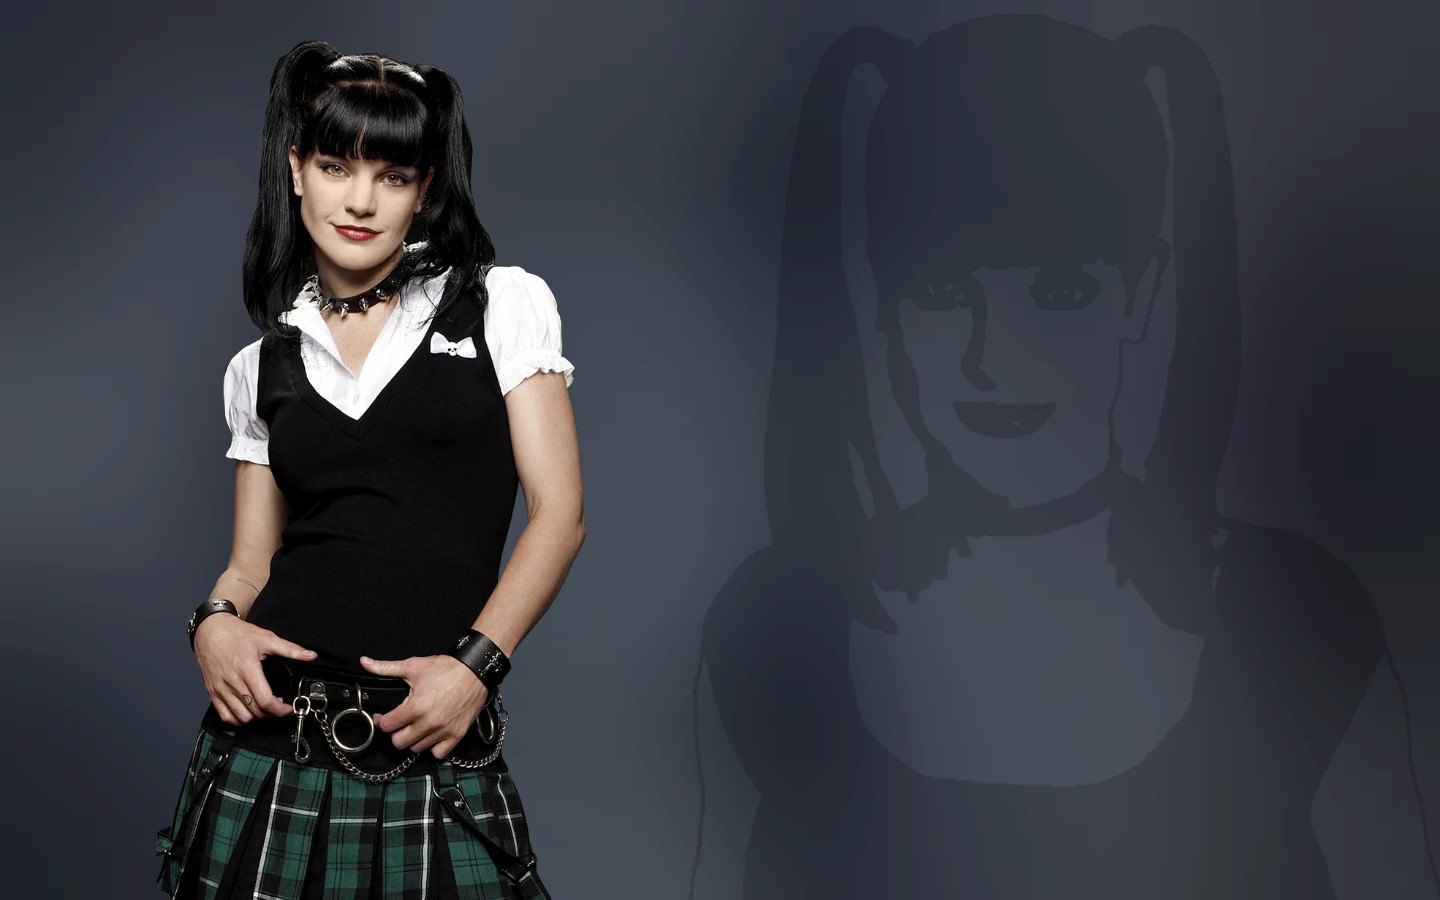 Pauley Perrette Images. 